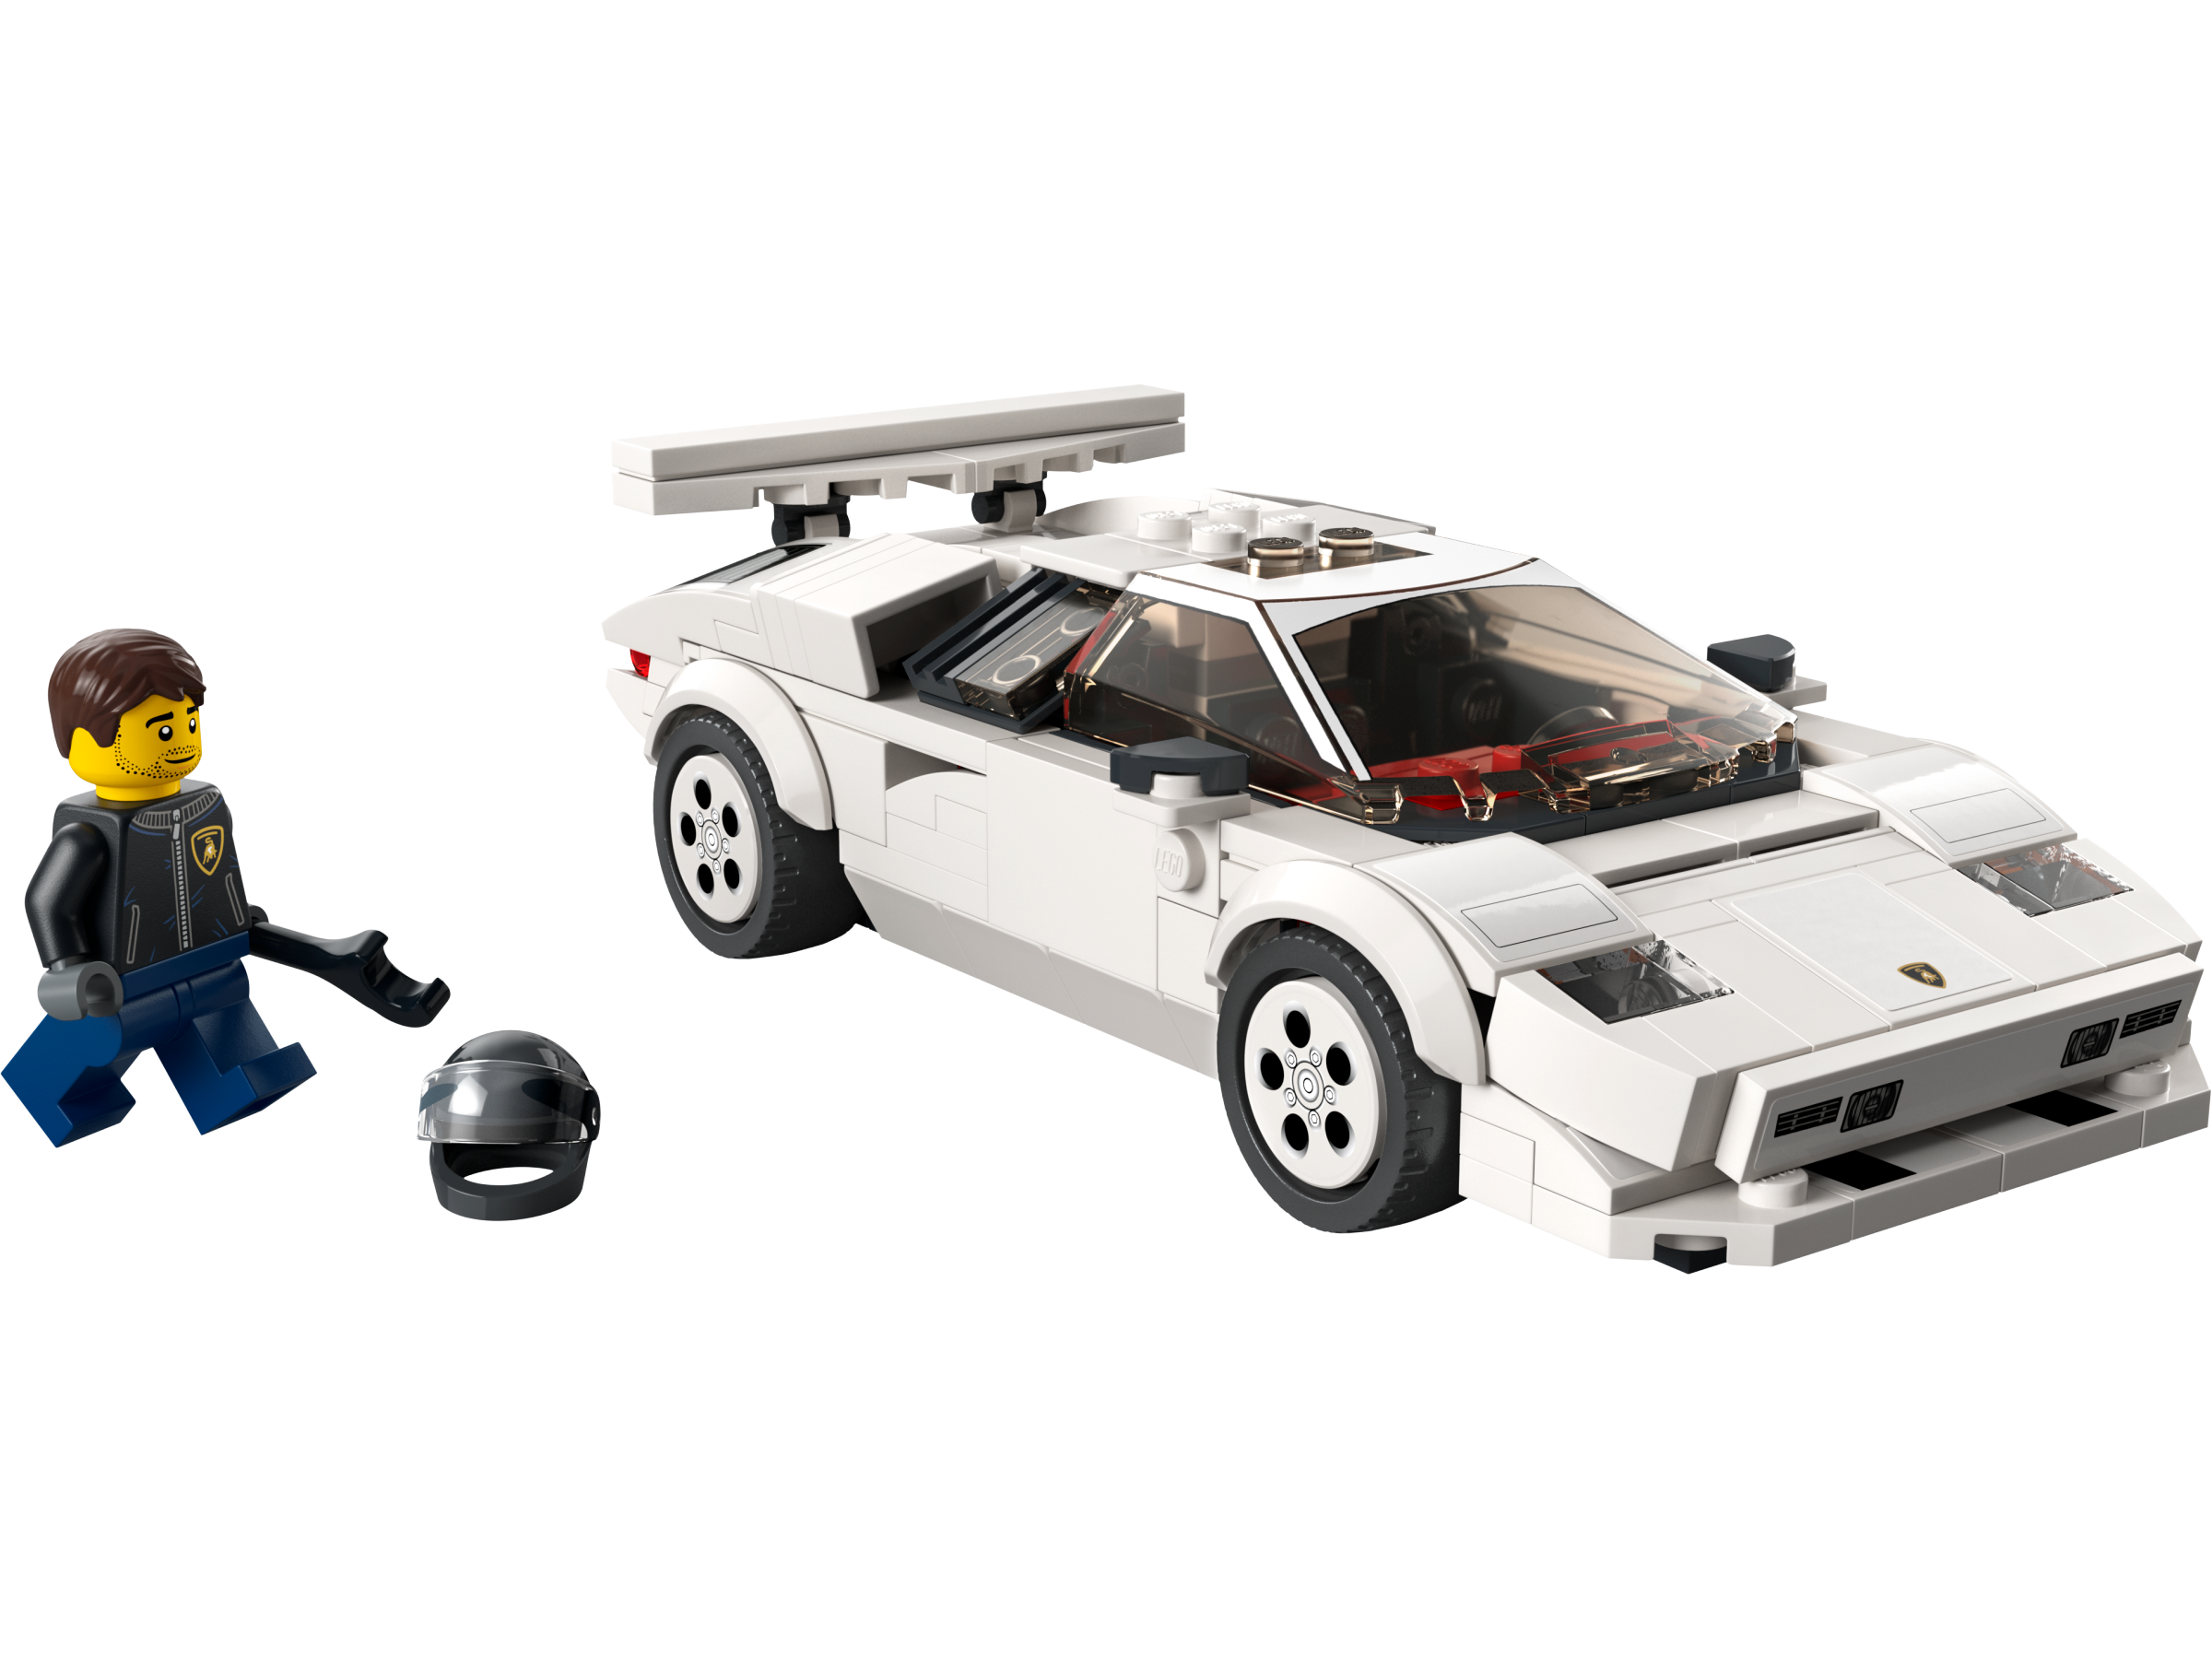 The Painstaking Process Behind LEGO's Most Popular Car Sets